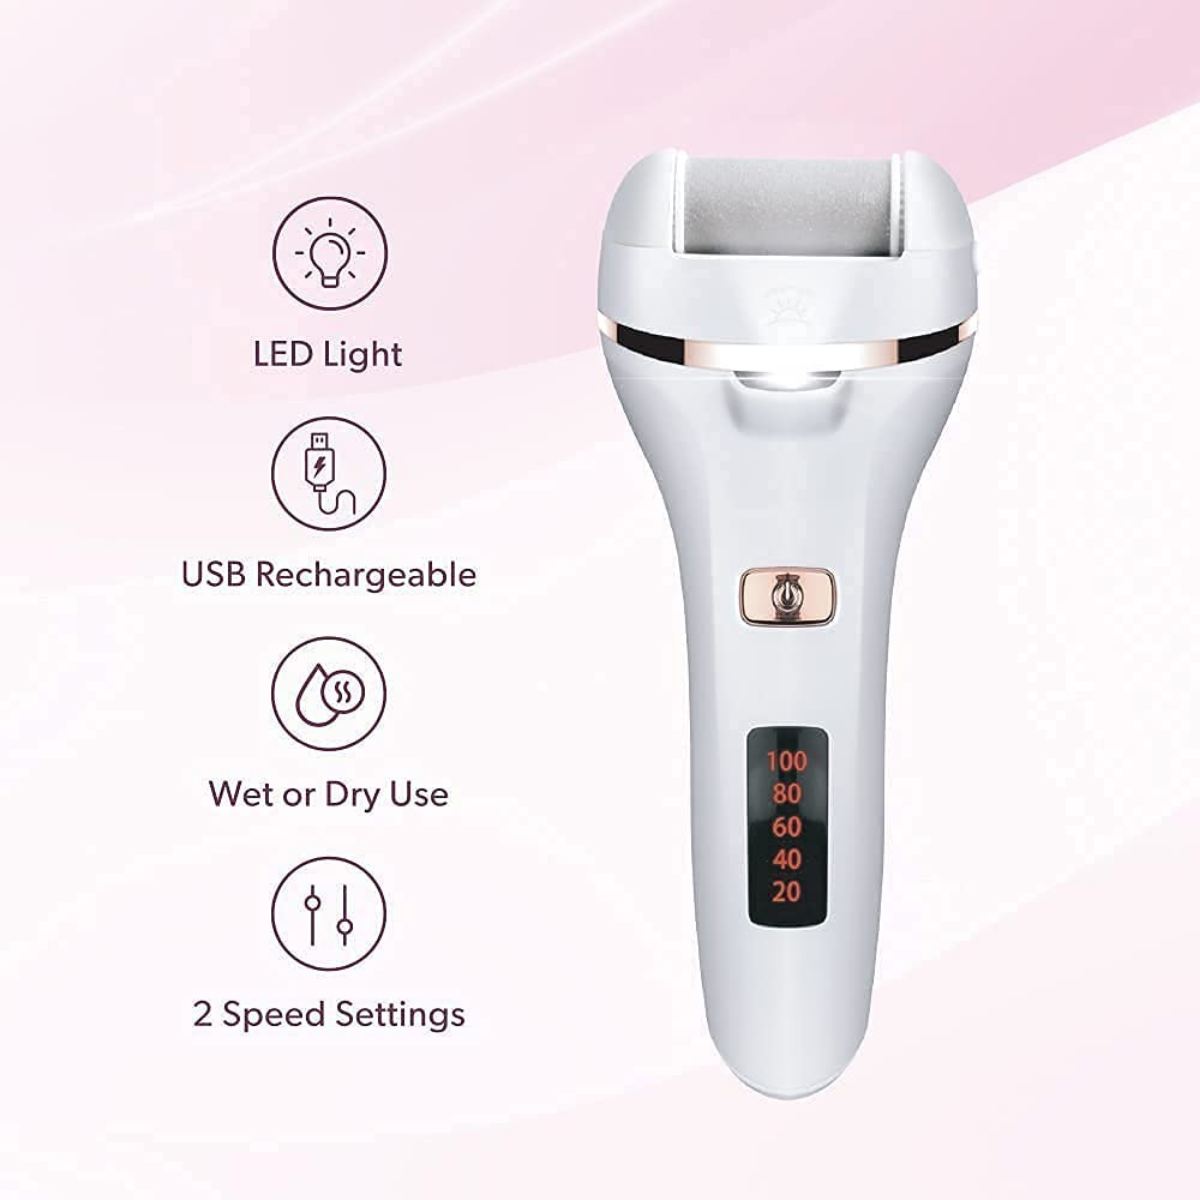 Foot Revive 2 in 1 Electric Callus Remover